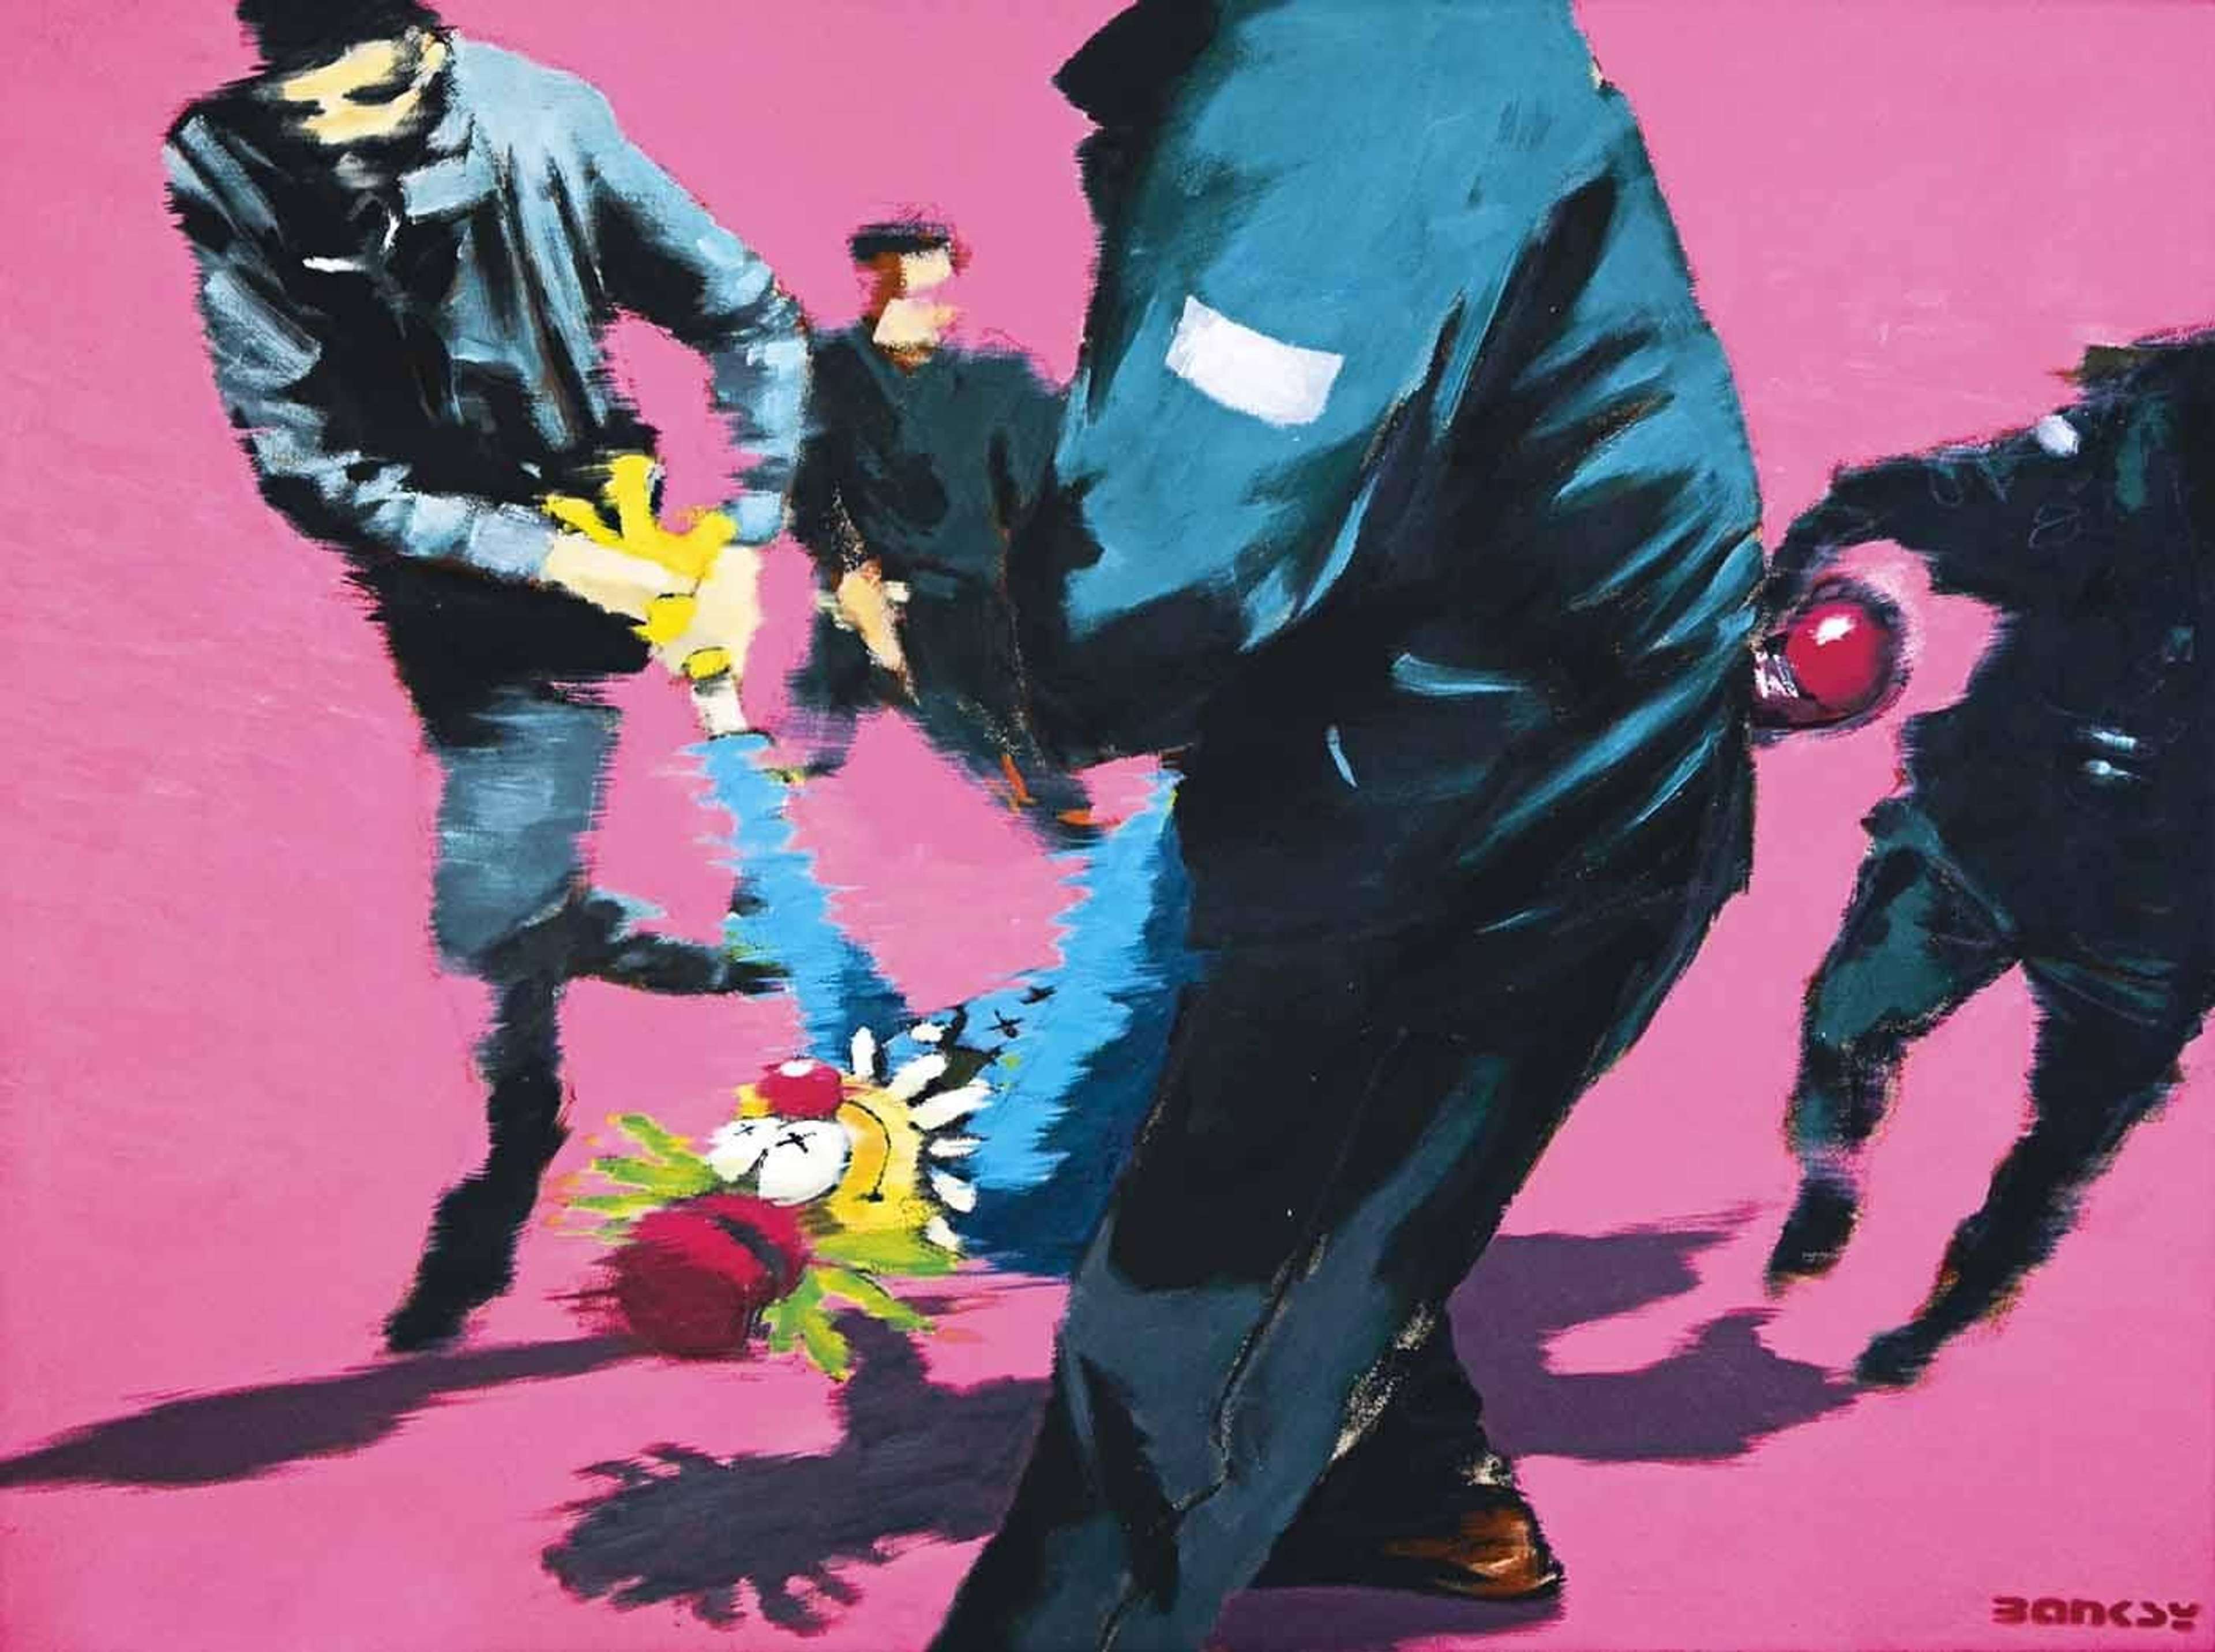 Banksy’s You Told That Joke Twice, 2000. A spray enamel and oil stick work of four policemen carrying a clown away